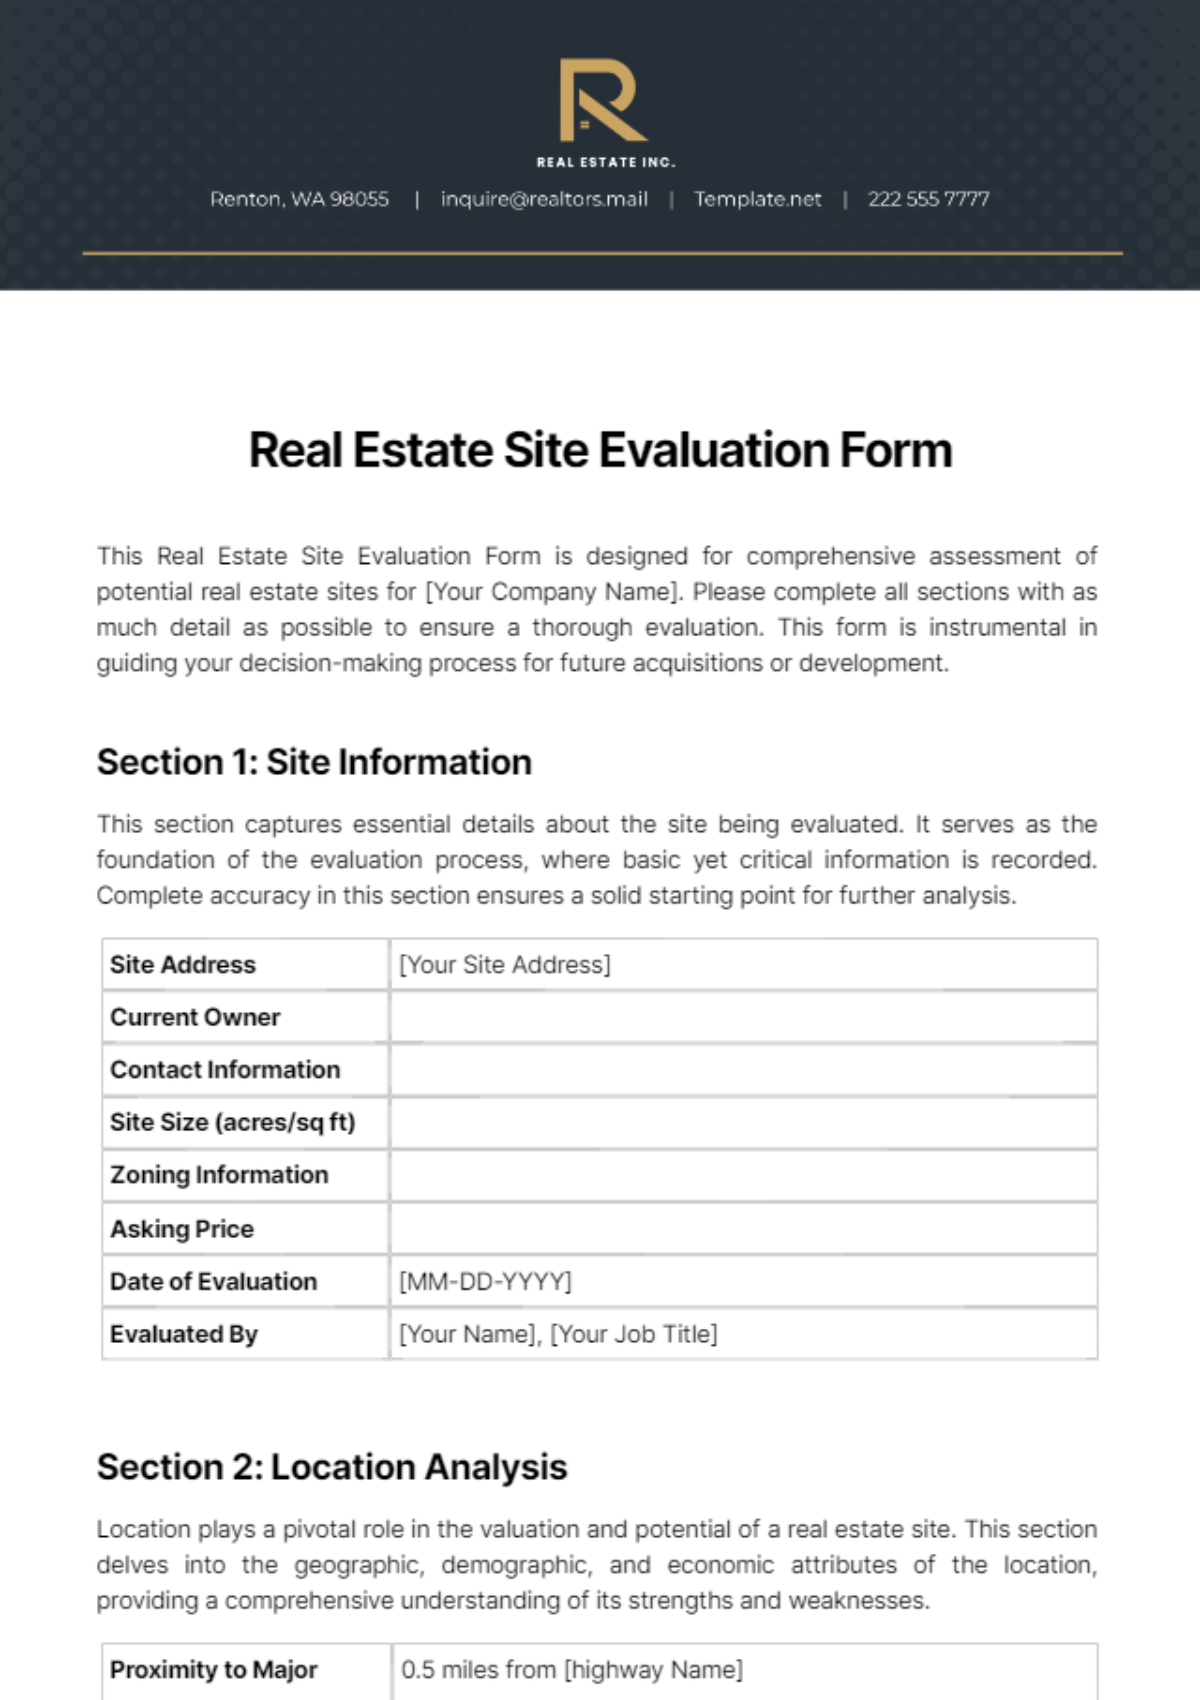 Real Estate Site Evaluation Form Template